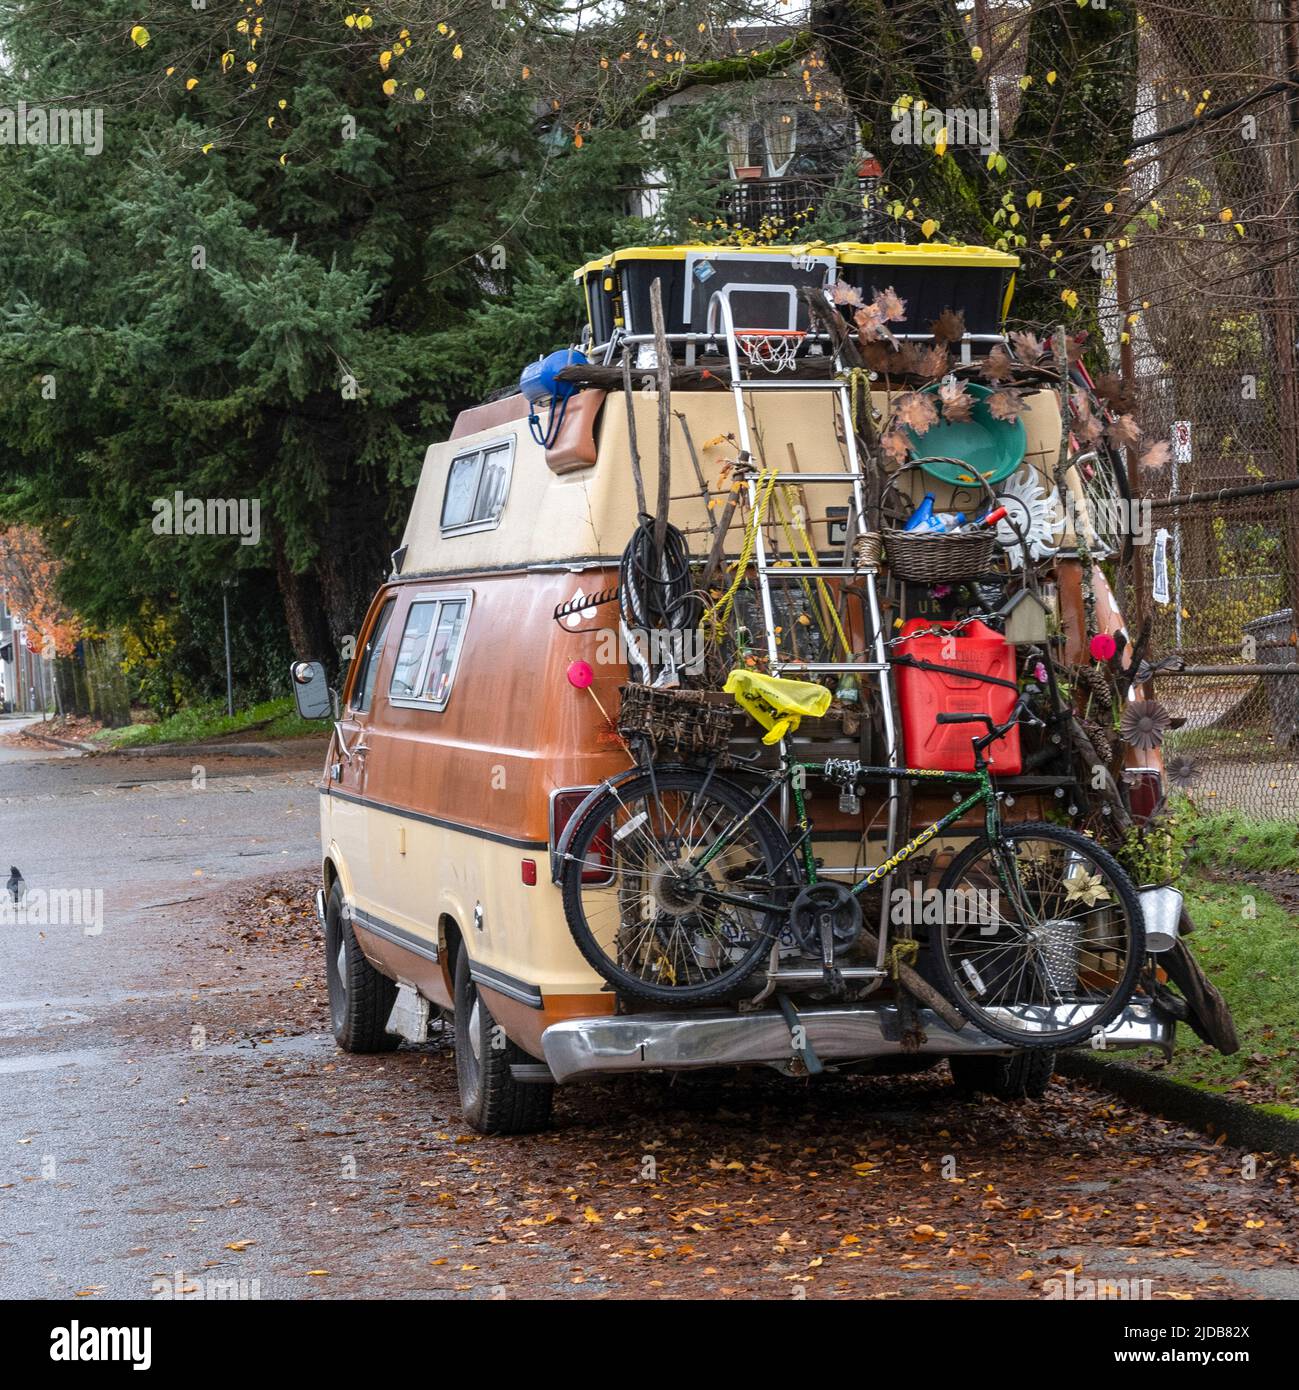 A camper van loaded with household goods including a bicycle parked and on a residential street; Vancouver, British Columbia, Canada Stock Photo